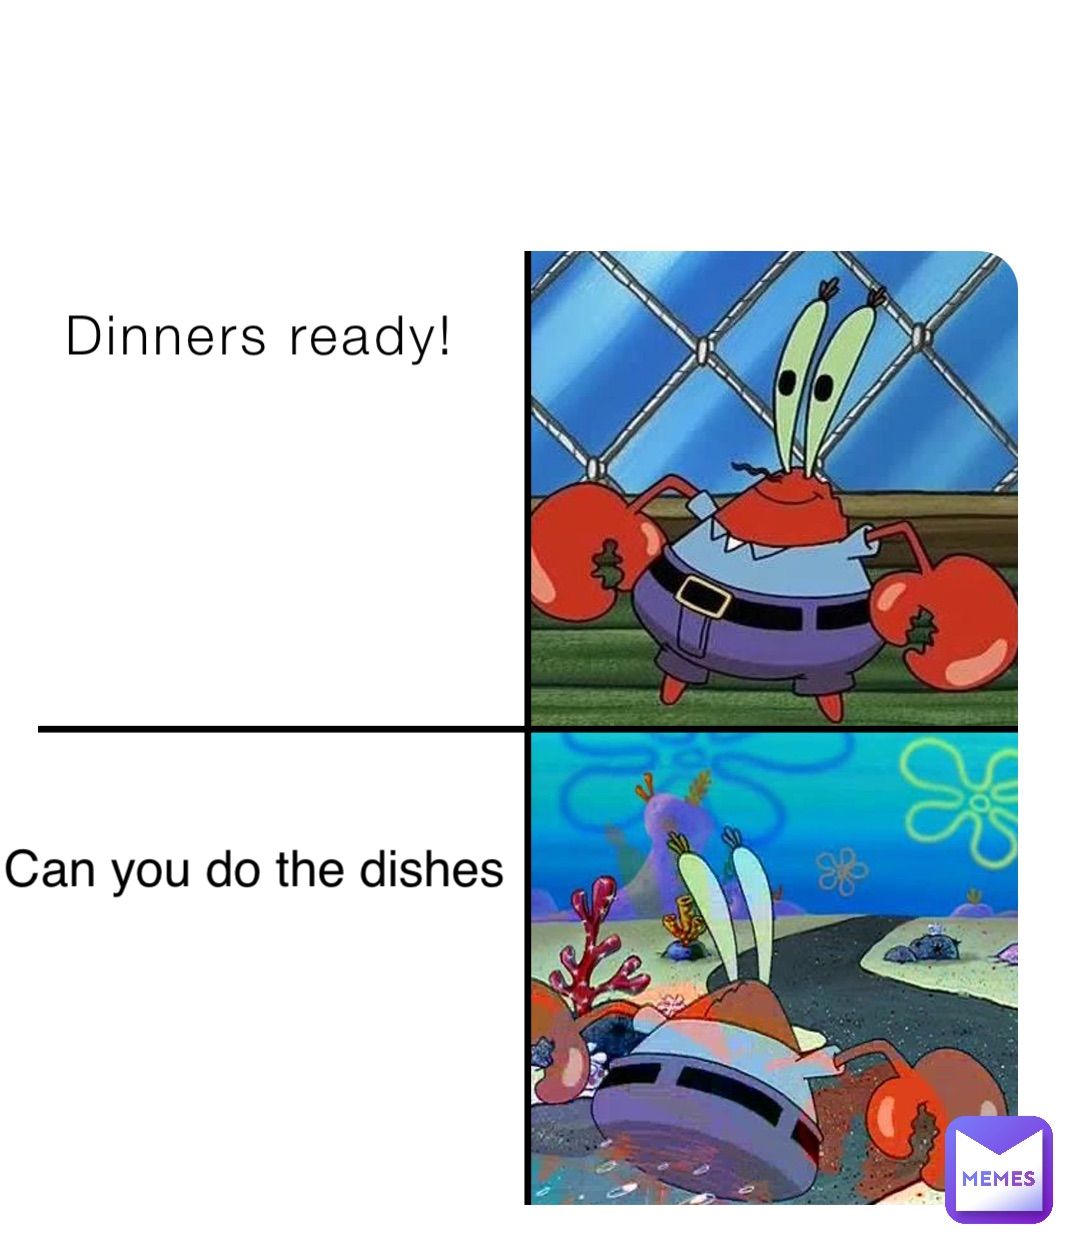 Dinners ready! Can you do the dishes